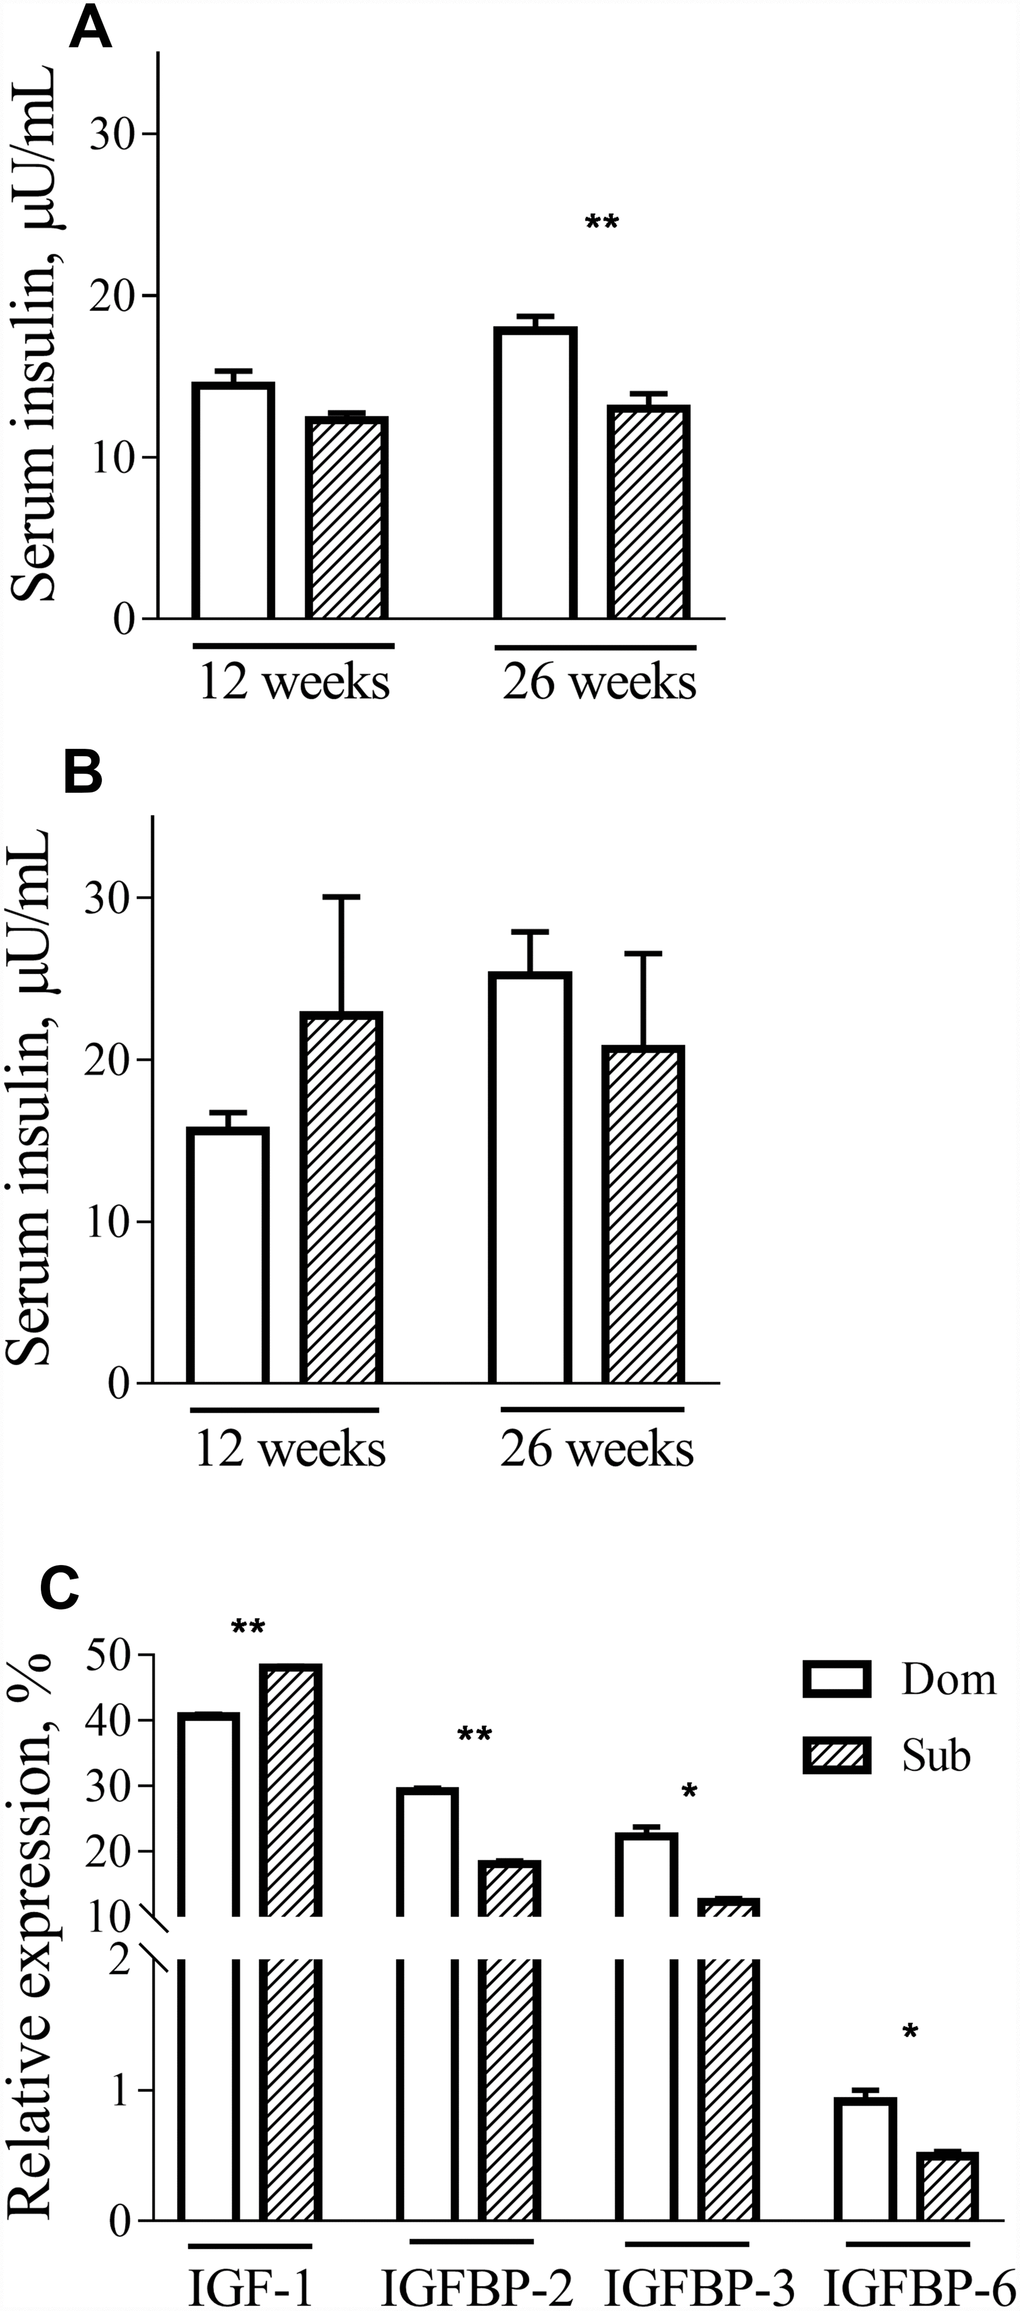 Insulin, IGF-1 and IGFBPs circulation levels. The insulin levels in male (A) and female (B) Dom and Sub mice at the age of 12 weeks (Dom males n=5, females n=5; Sub males n=5, females n=6) and 26 weeks (Dom males n=5, females n=4; Sub males n=5, females n=5). In 26-week-old Sub males the fasting insulin level was significantly lower than in Dom (t=3.803, pC) IGF-1, IGFBP-2, IGFBP-3 and IGFBP-6 serum levels in Dom and Sub male mice. In the serum of Sub mice a significant elevation of IGF-1 (t=20.11, ppppppt-test was used. Error bars indicate SEM.